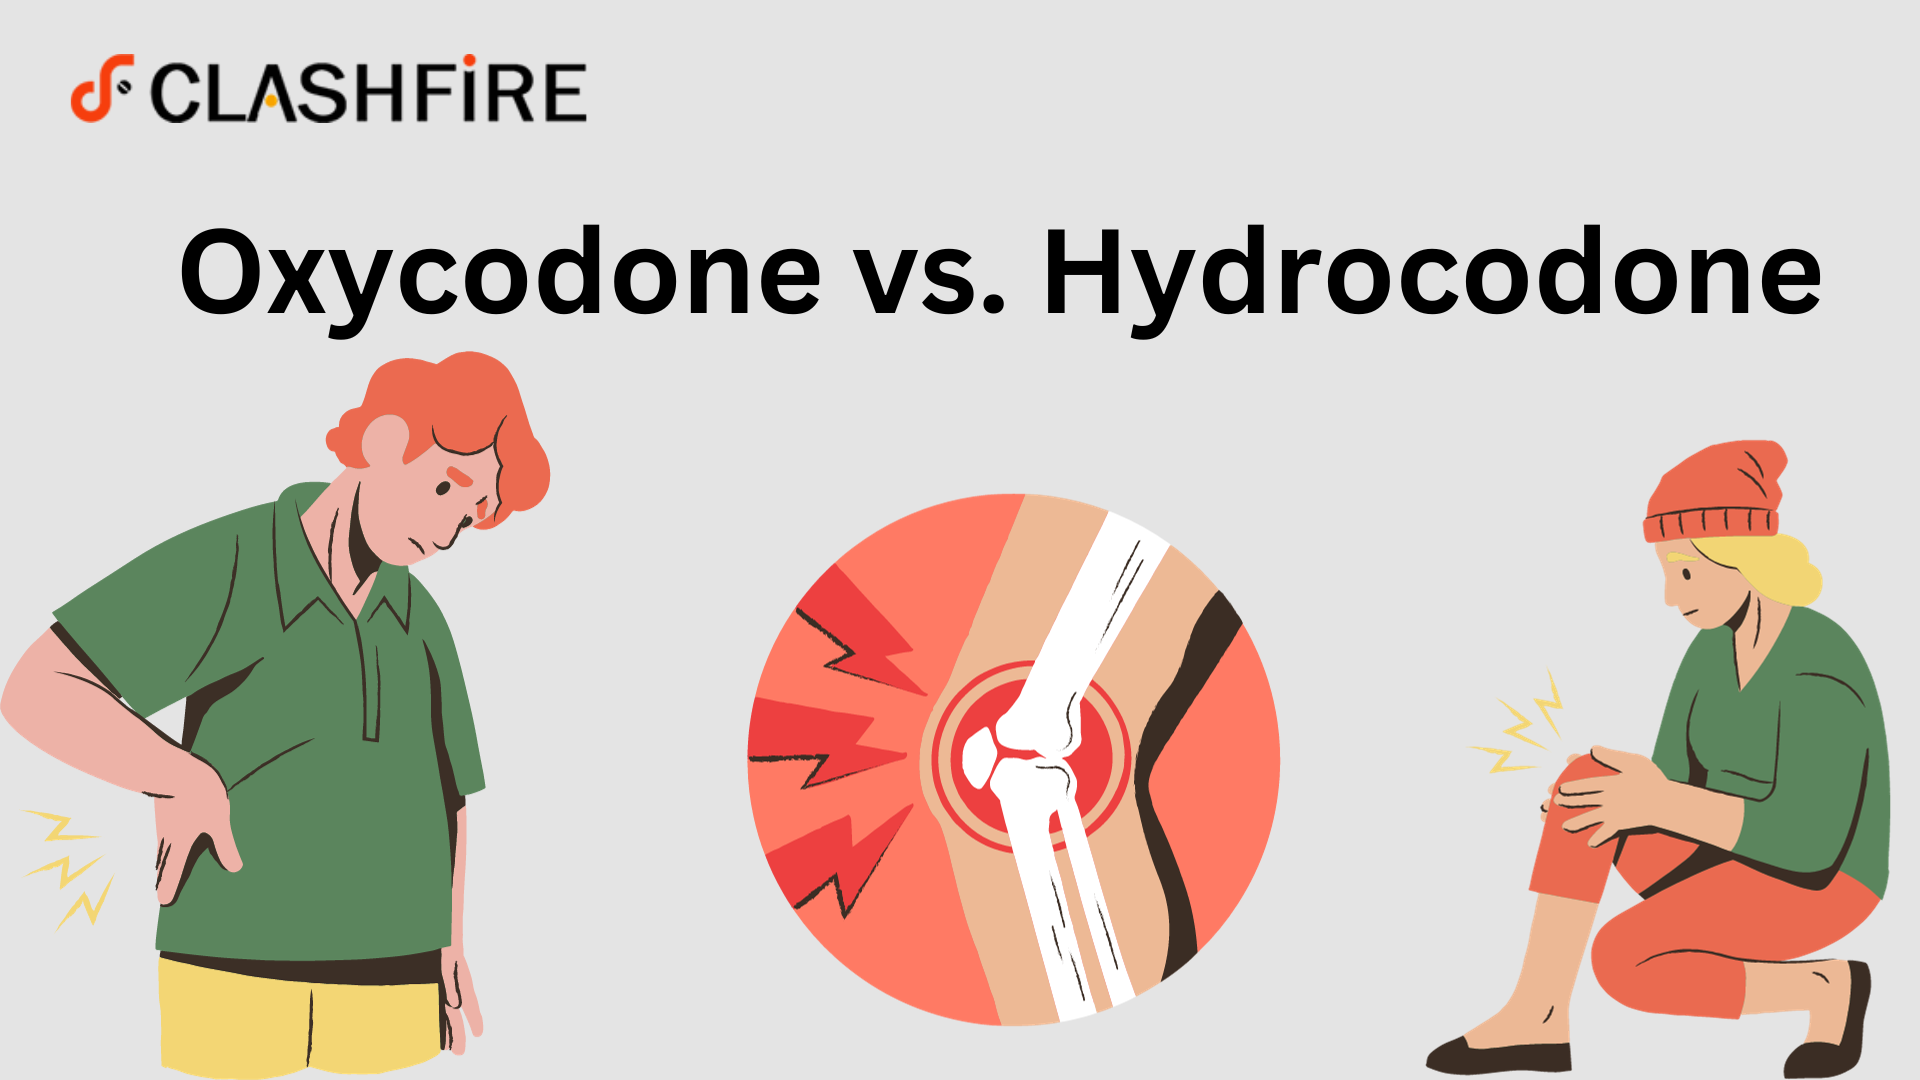 Oxycodone vs. Hydrocodone for acute and chronic pain relief 6